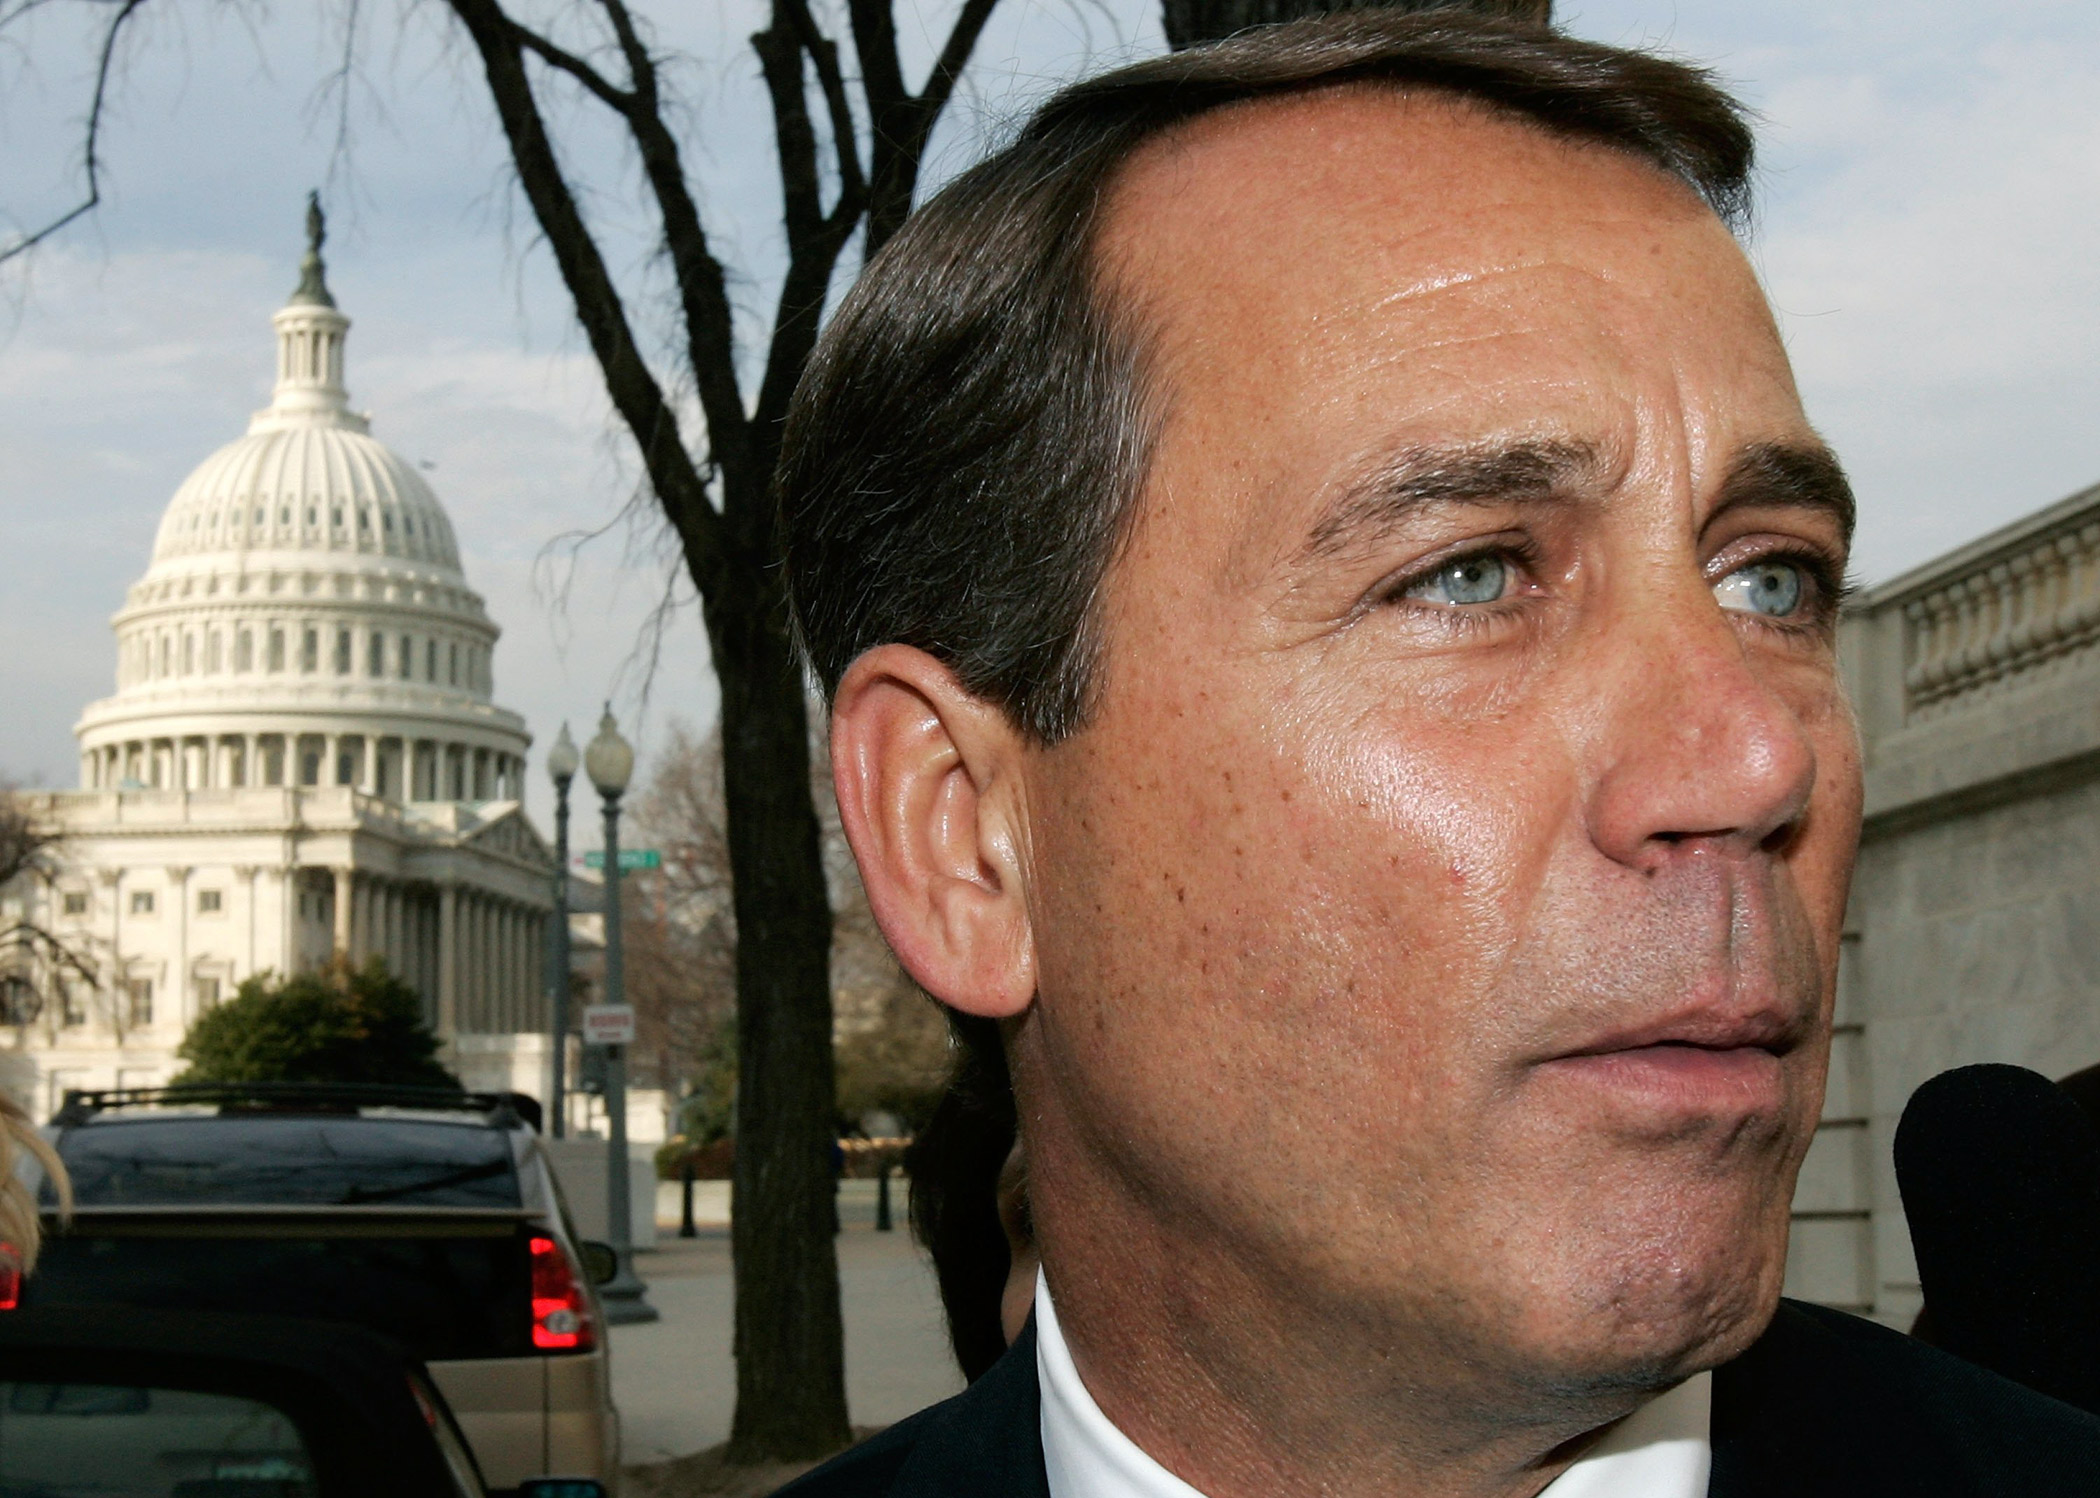 Boehner after being elected as House Republican leader on Capitol Hill in Washington on Feb. 2, 2006.